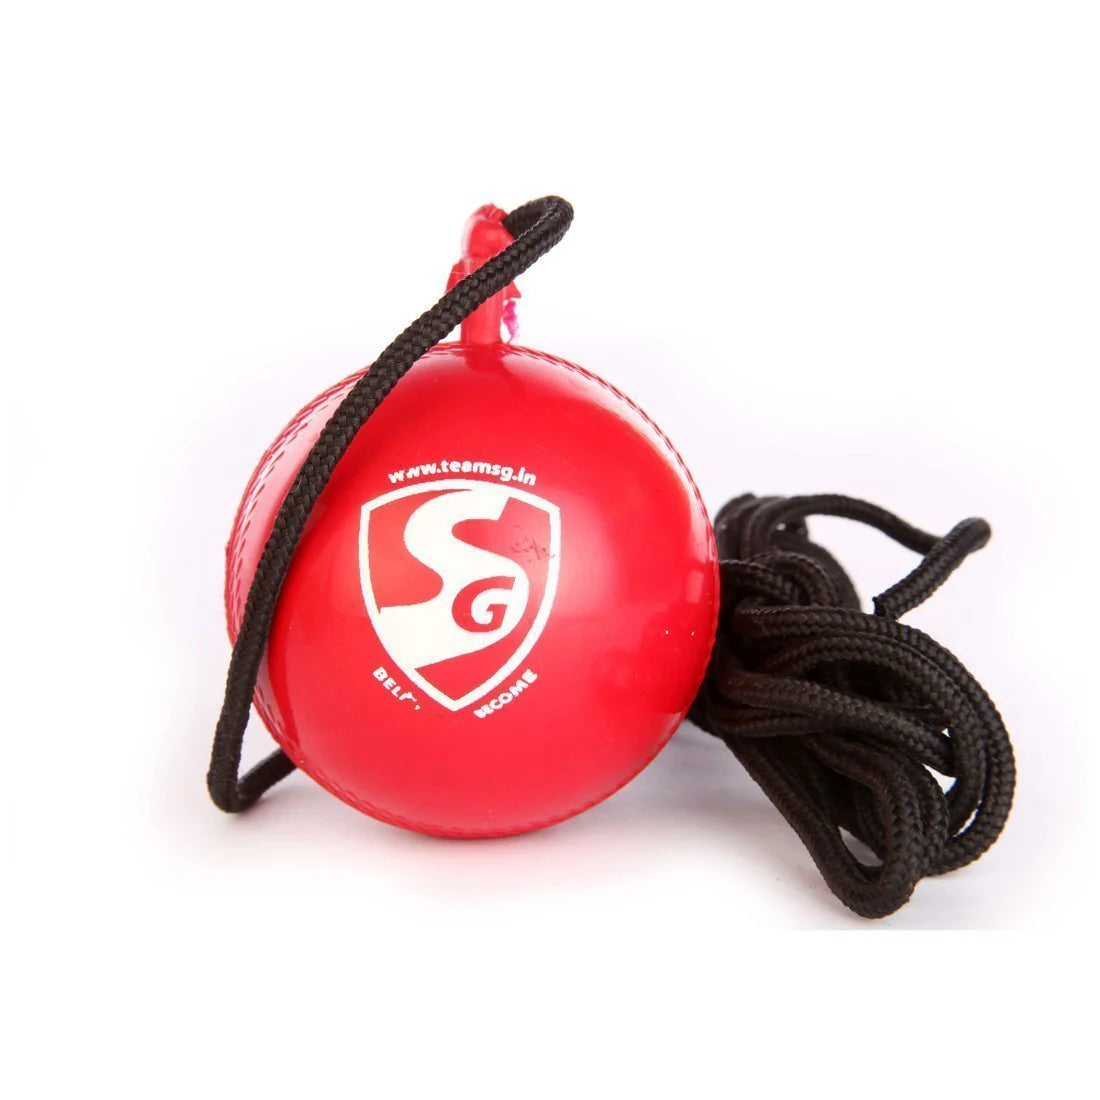 Pre-Order SG iBall (ball with cord)